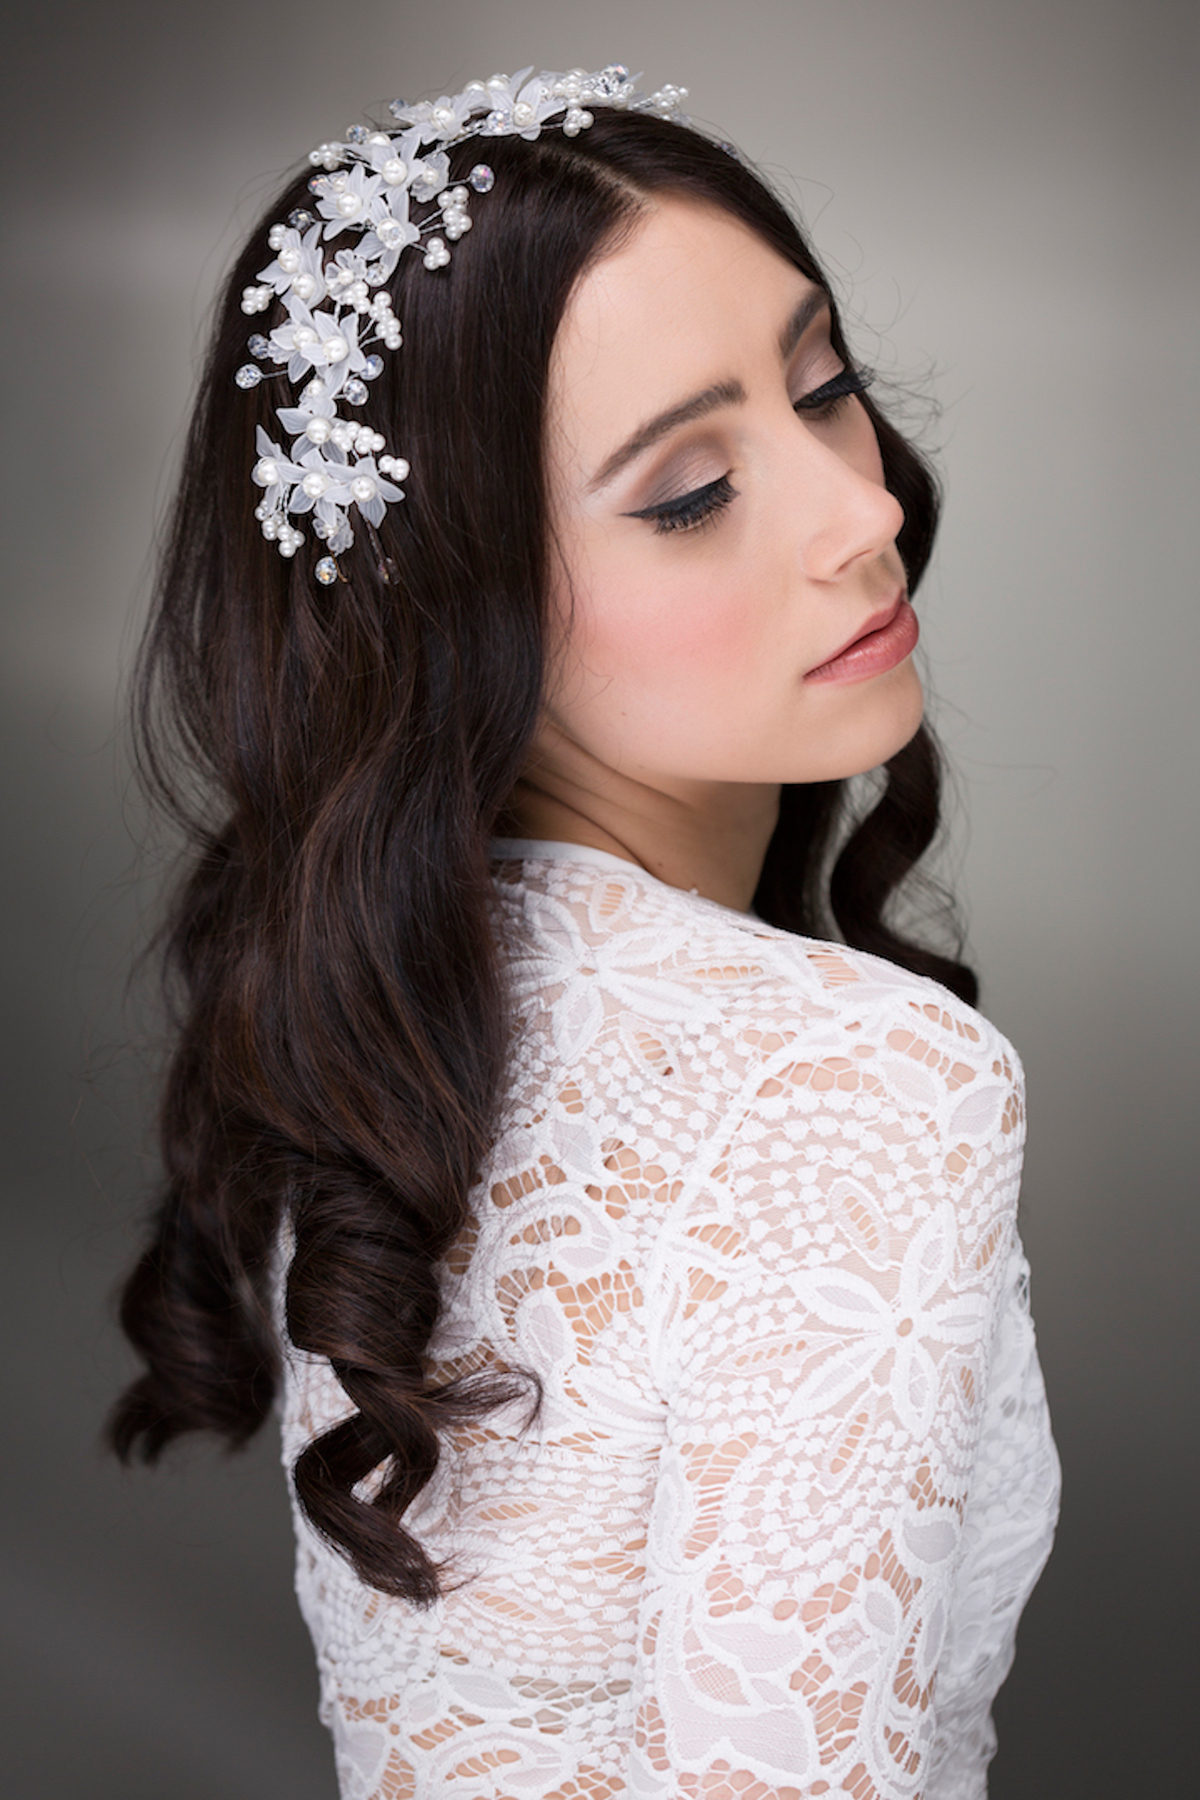 About Eve handcrafted wedding headpieces hair accessories 14